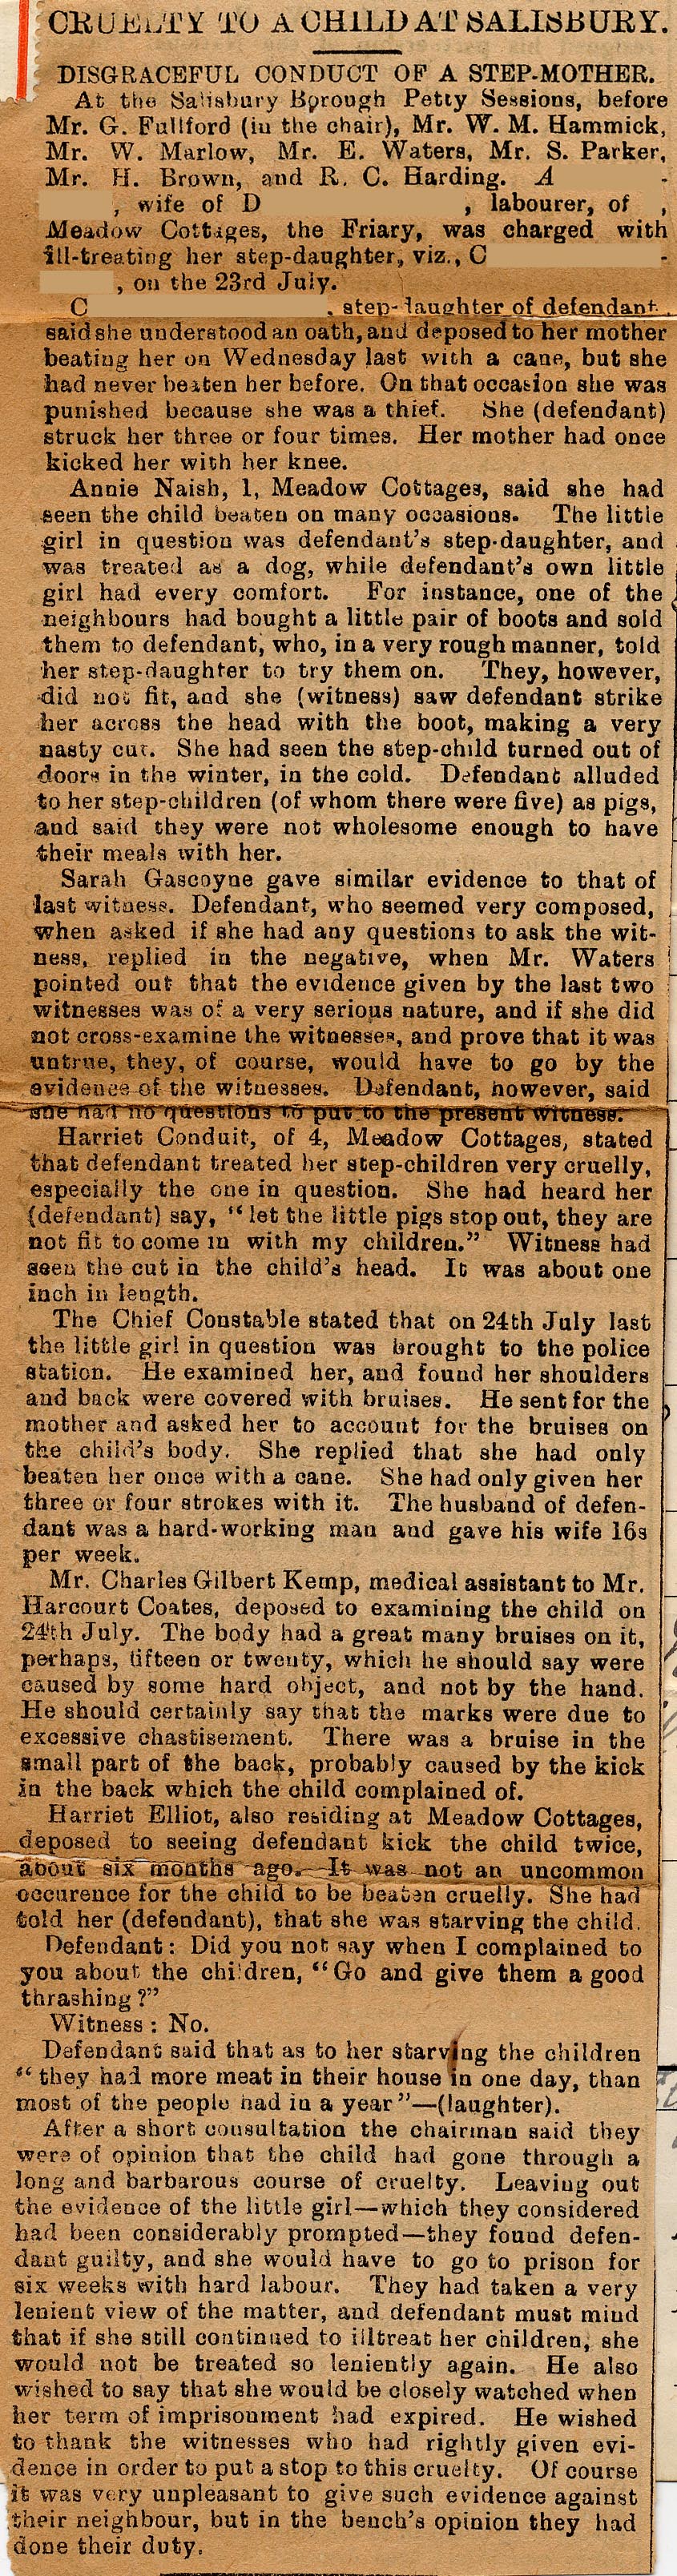 Large size image of Case 5505 2. 'Cruelty to a child at Salisbury', newspaper clipping, c. 30 July 1896
 page 1